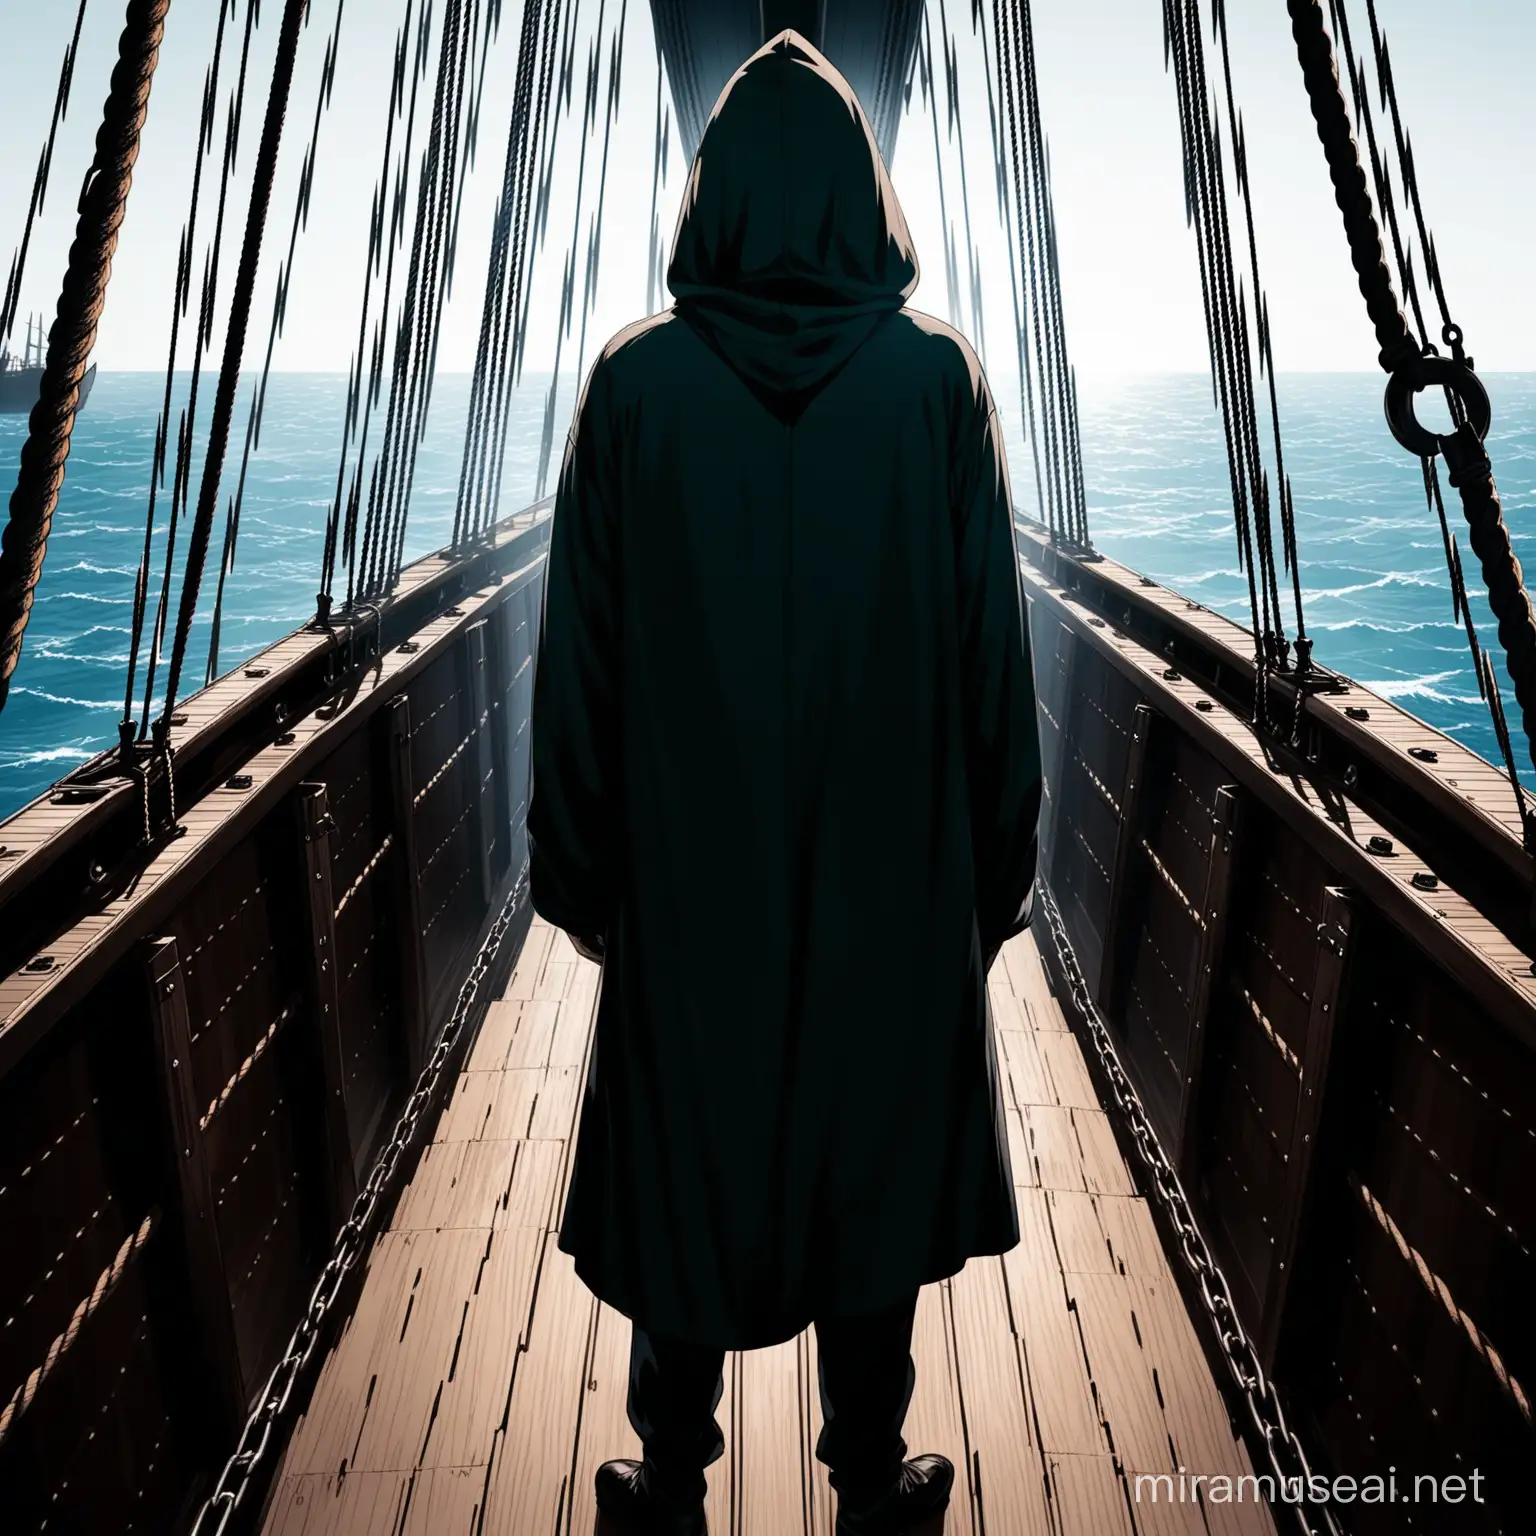 Mysterious Hooded Figure Aboard Historic Galleon